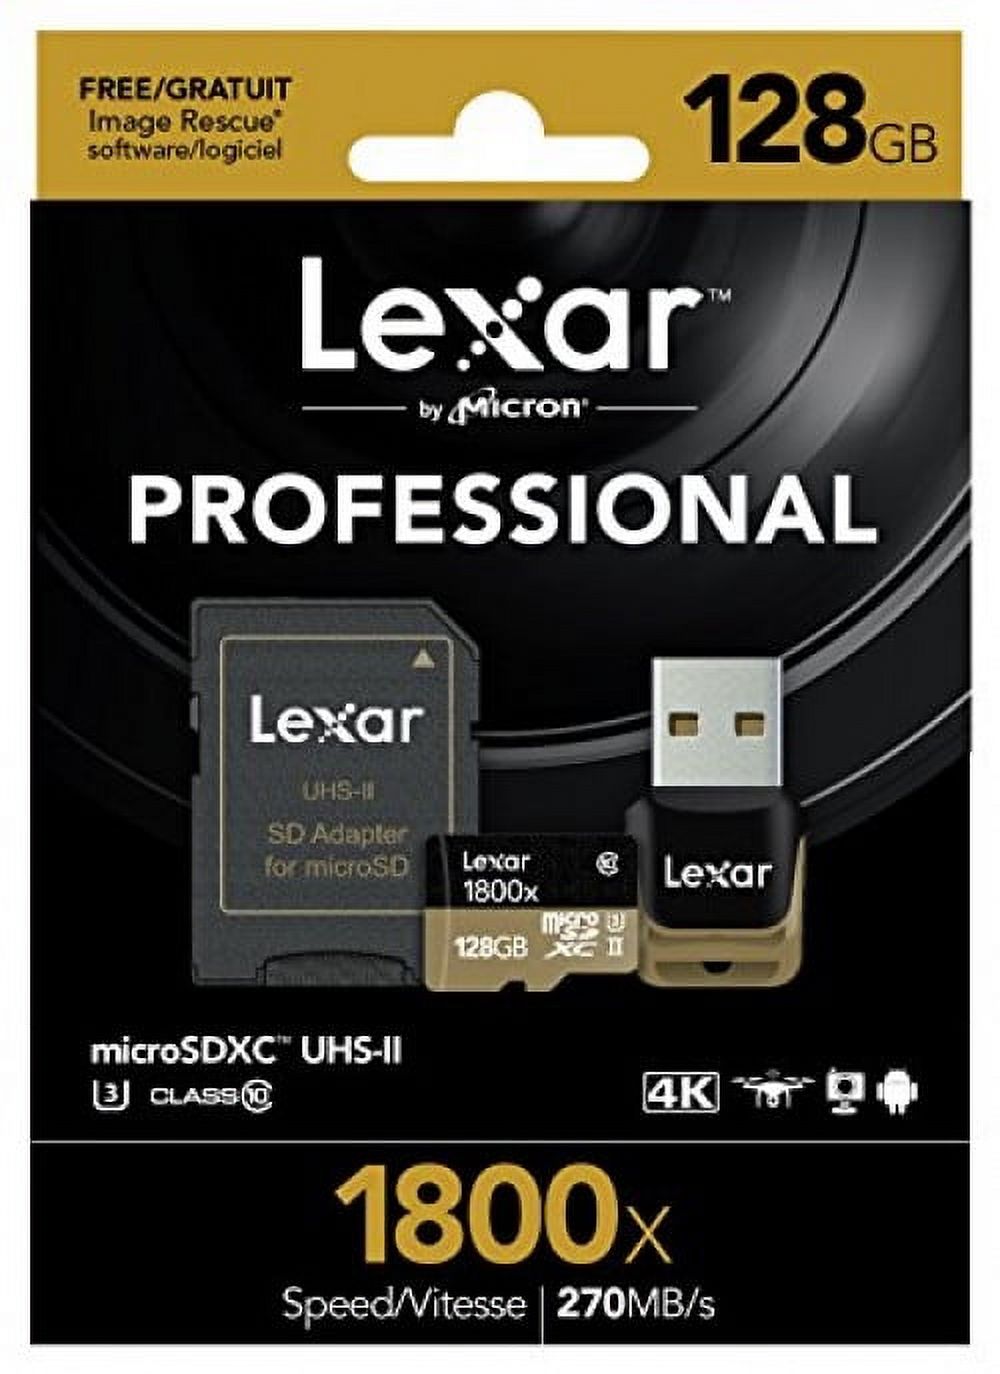 Lexar Professional - Flash memory card (microSDXC to SD adapter included) - 128 GB - UHS Class 3 / Class10 - 1800x - microSDXC UHS-II - image 3 of 6